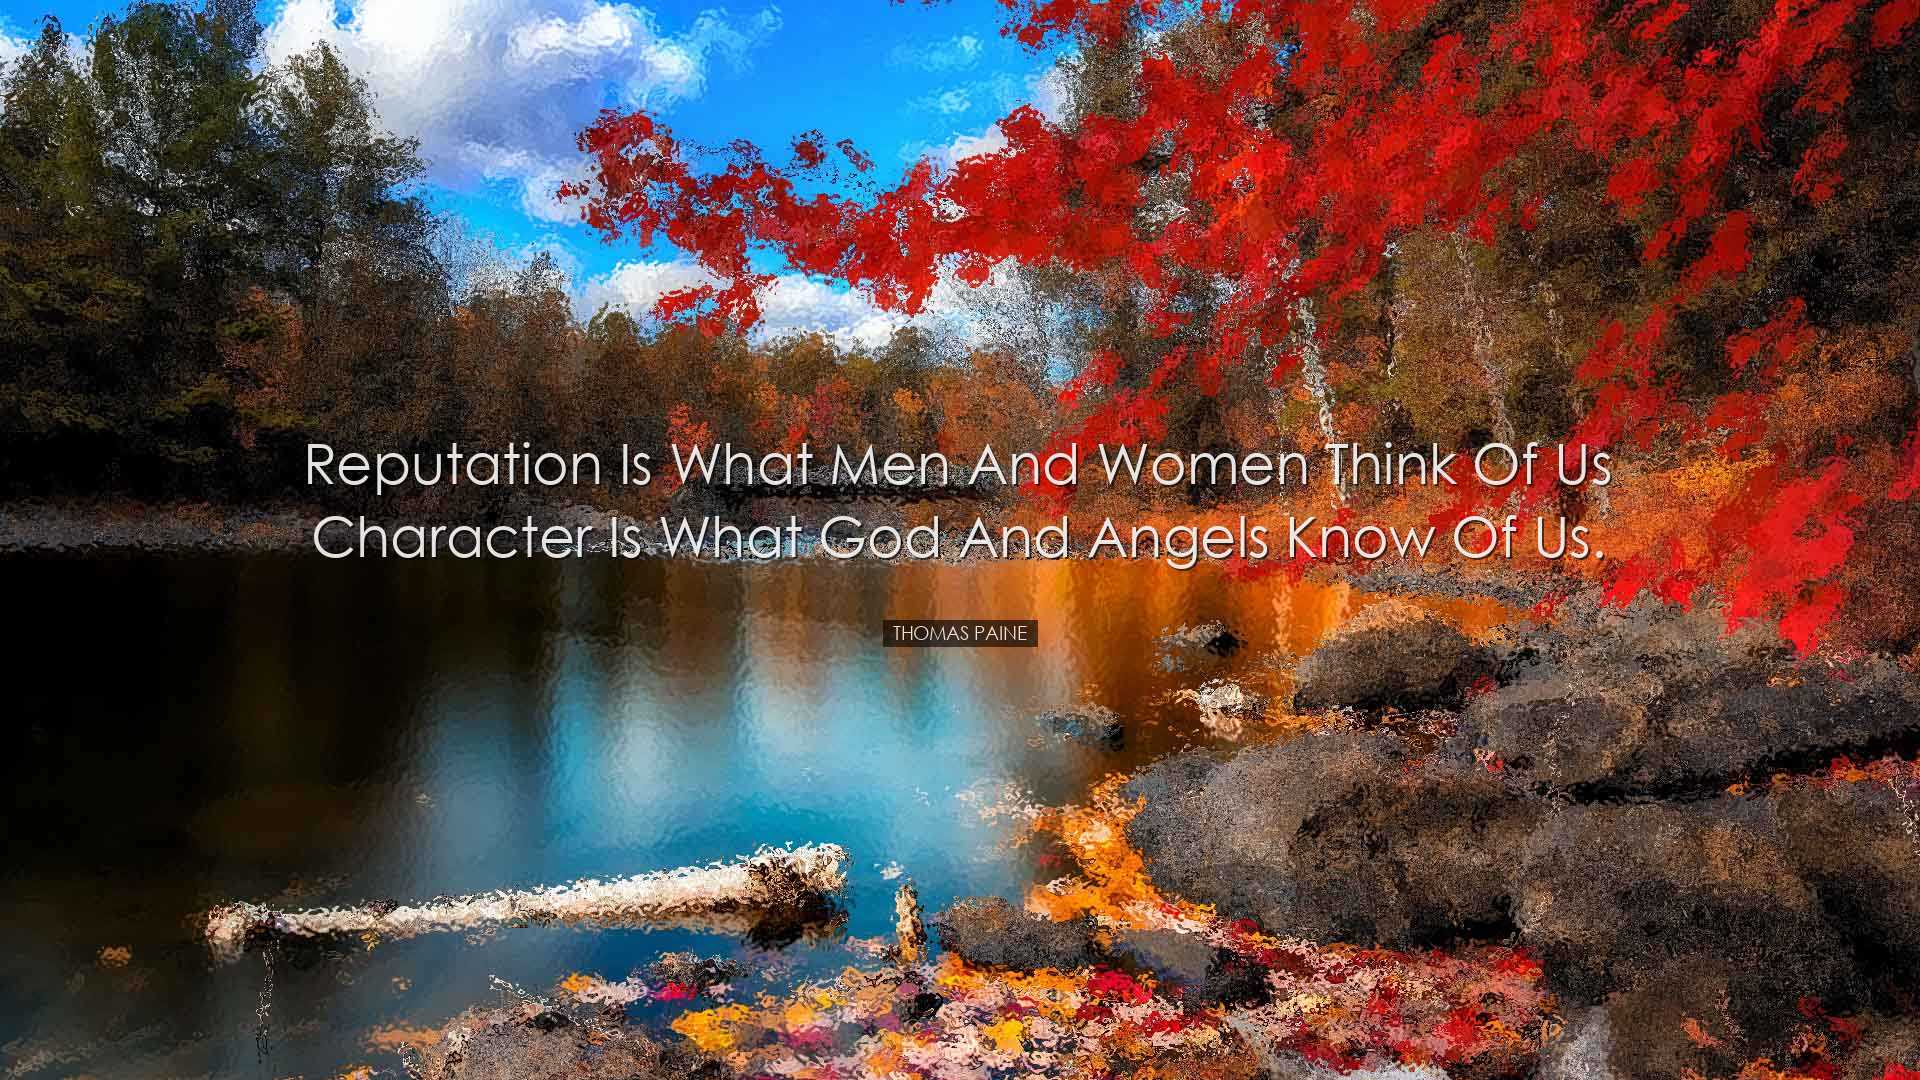 Reputation is what men and women think of us character is what God